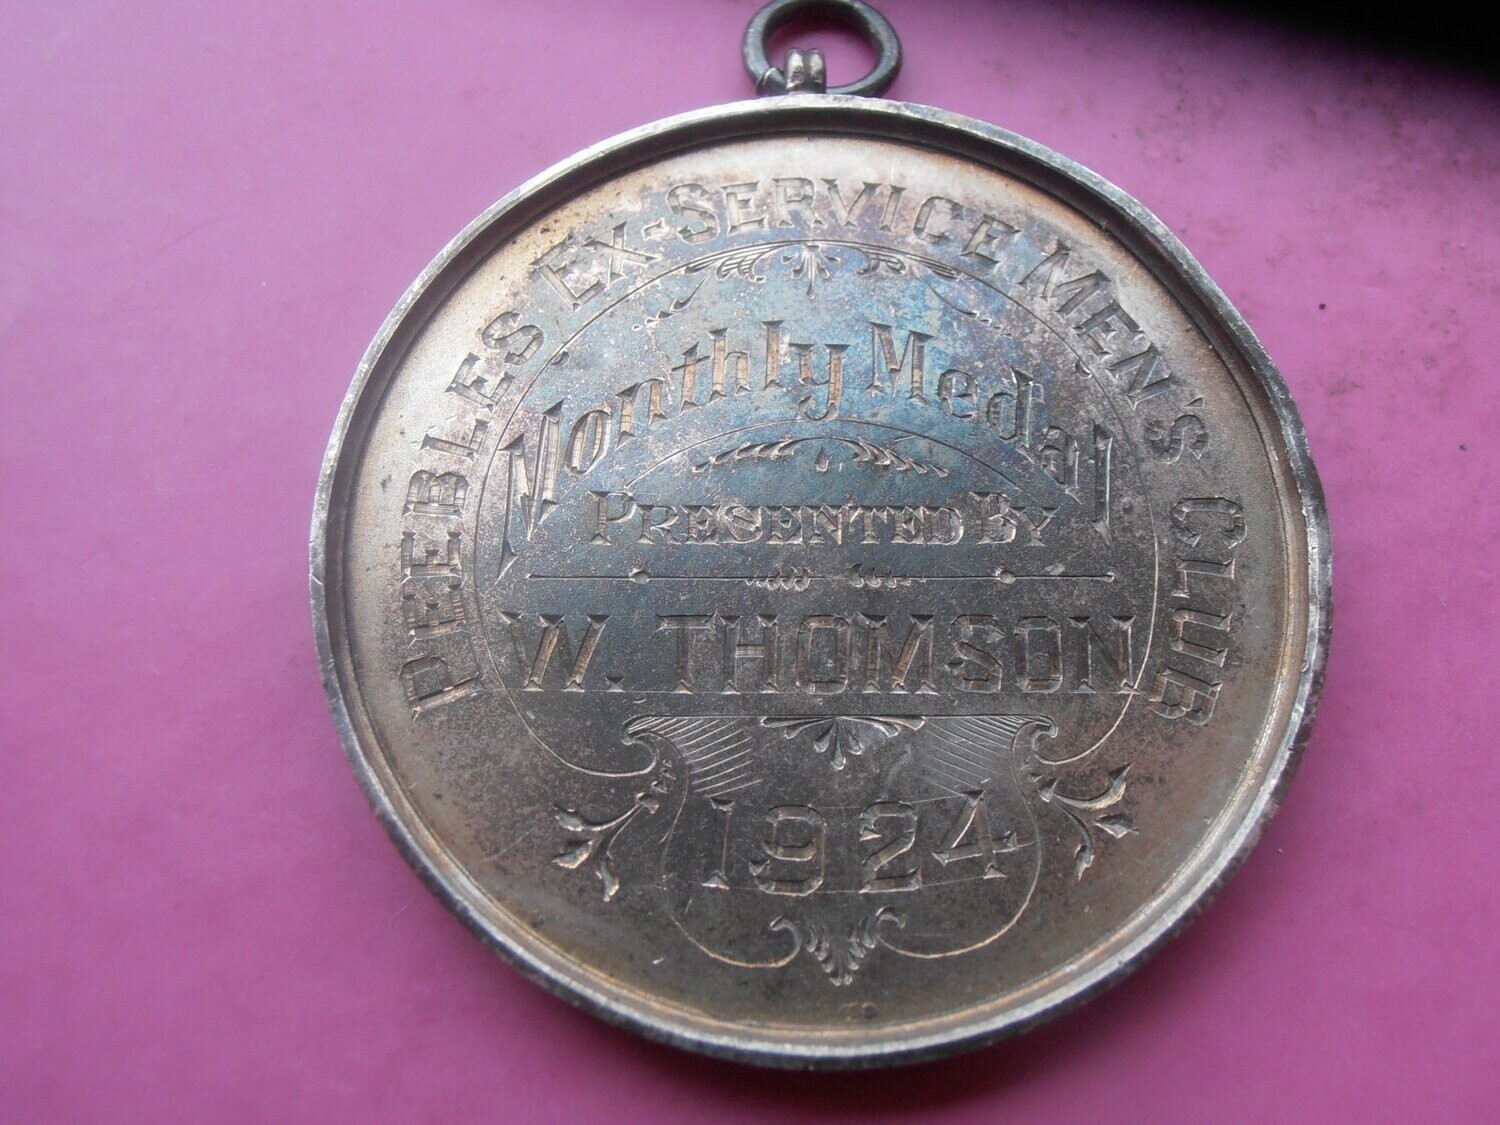 Peebles Ex-Servicemens Club monthly Medal - 1924